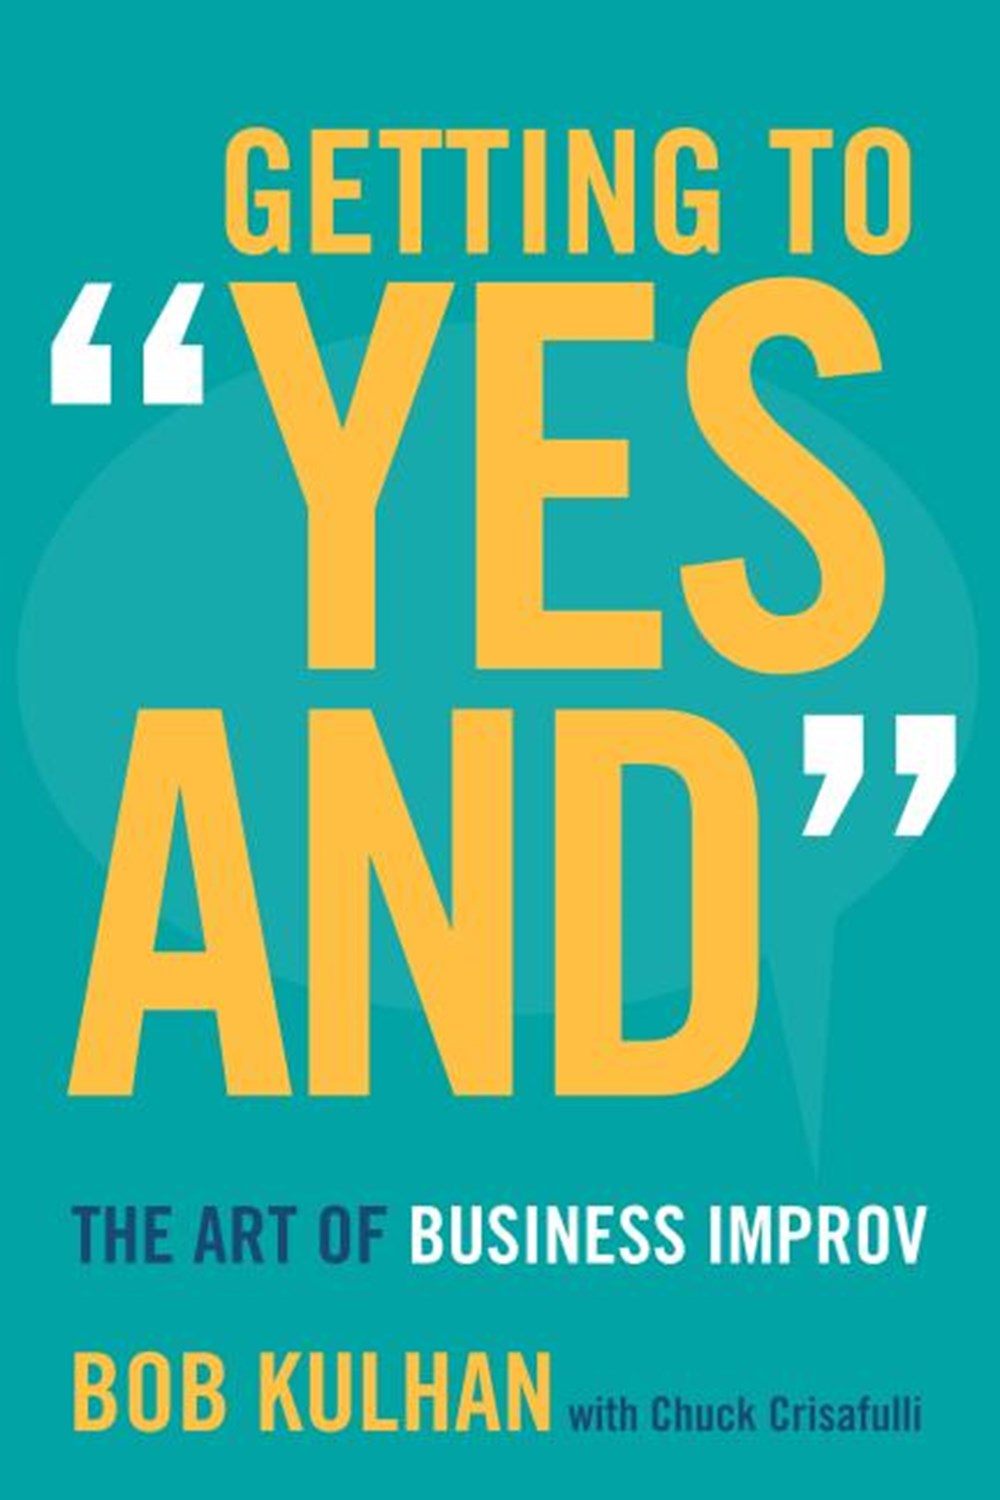 Getting to "Yes And" The Art of Business Improv